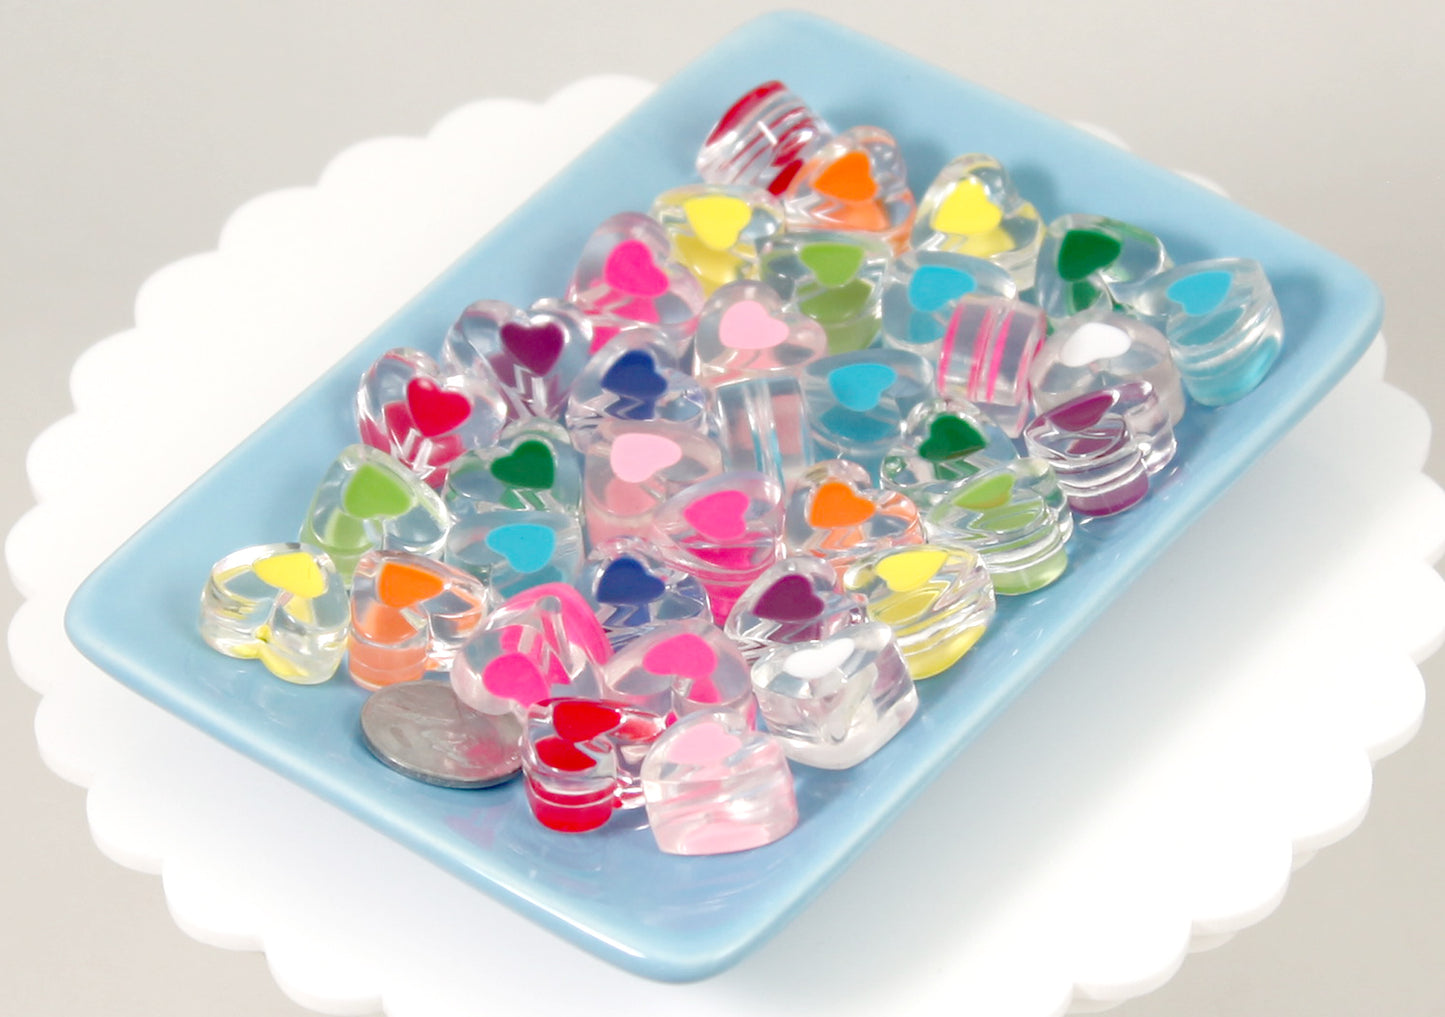 17mm Transparent Lovely Double Inner Heart Resin or Acrylic Beads - 20 pc set